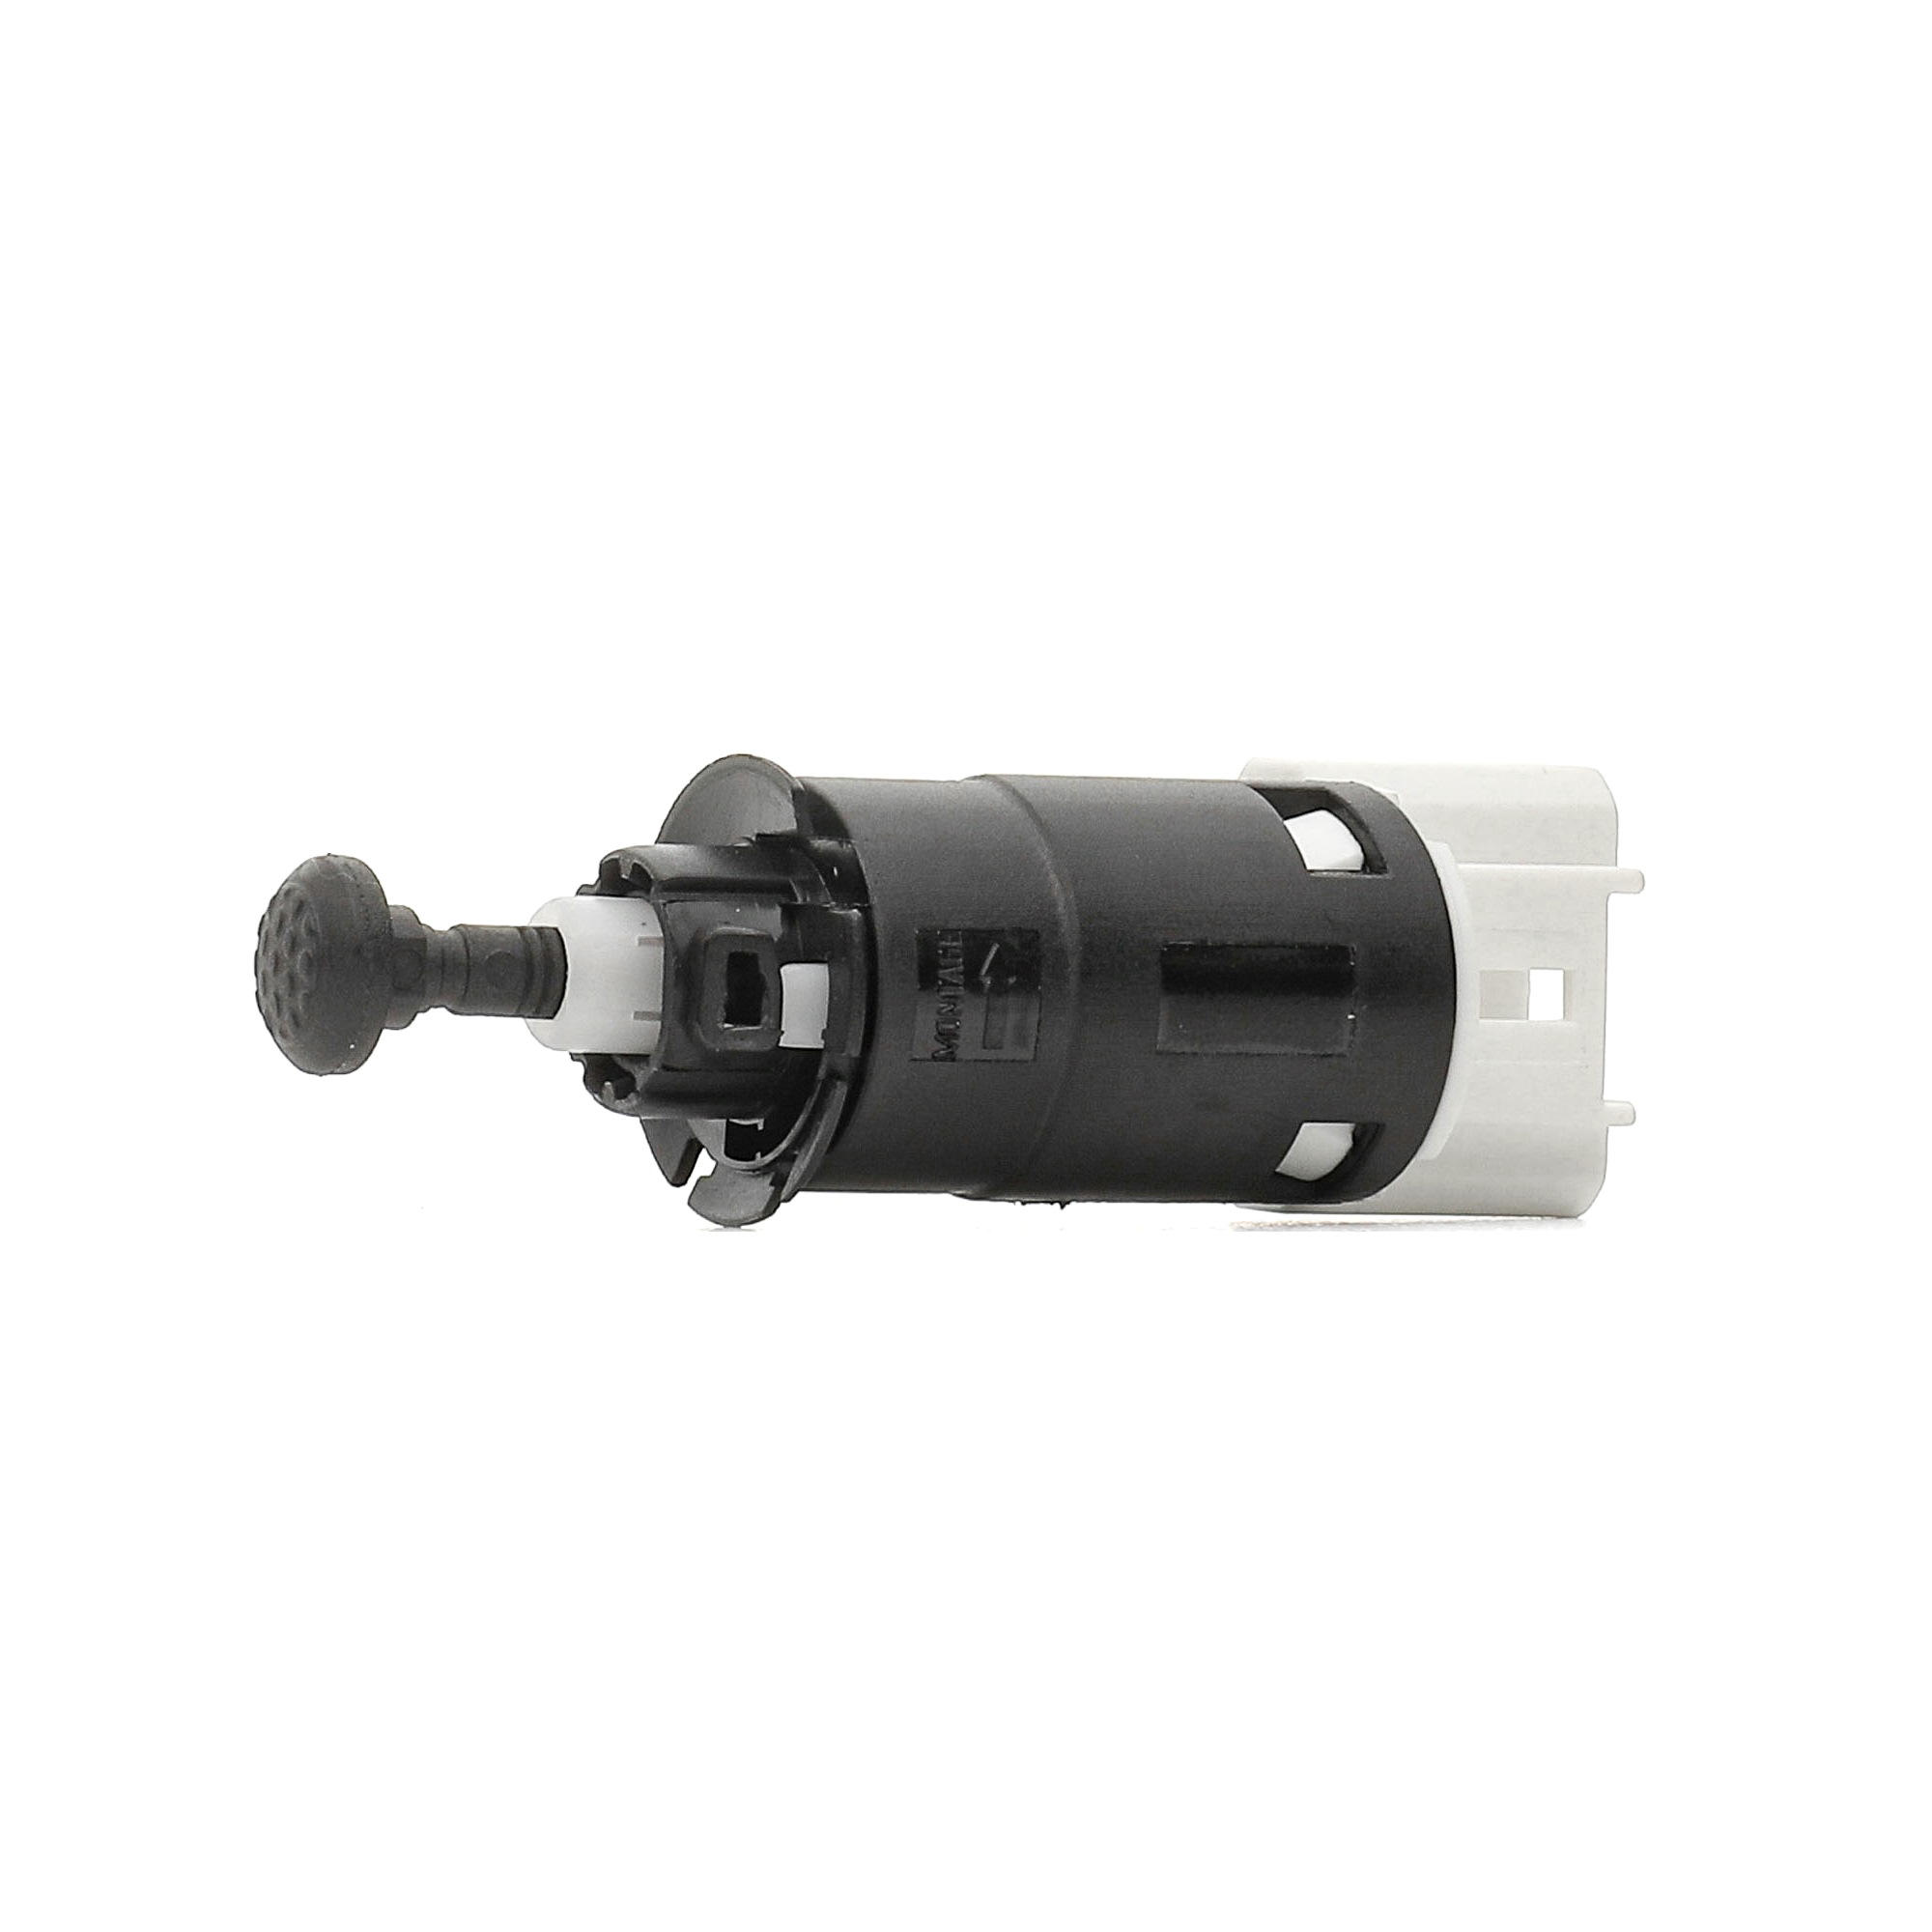 STARK Electric, Mechanical, 4-pin connector Number of pins: 4-pin connector Stop light switch SKBL-2110036 buy